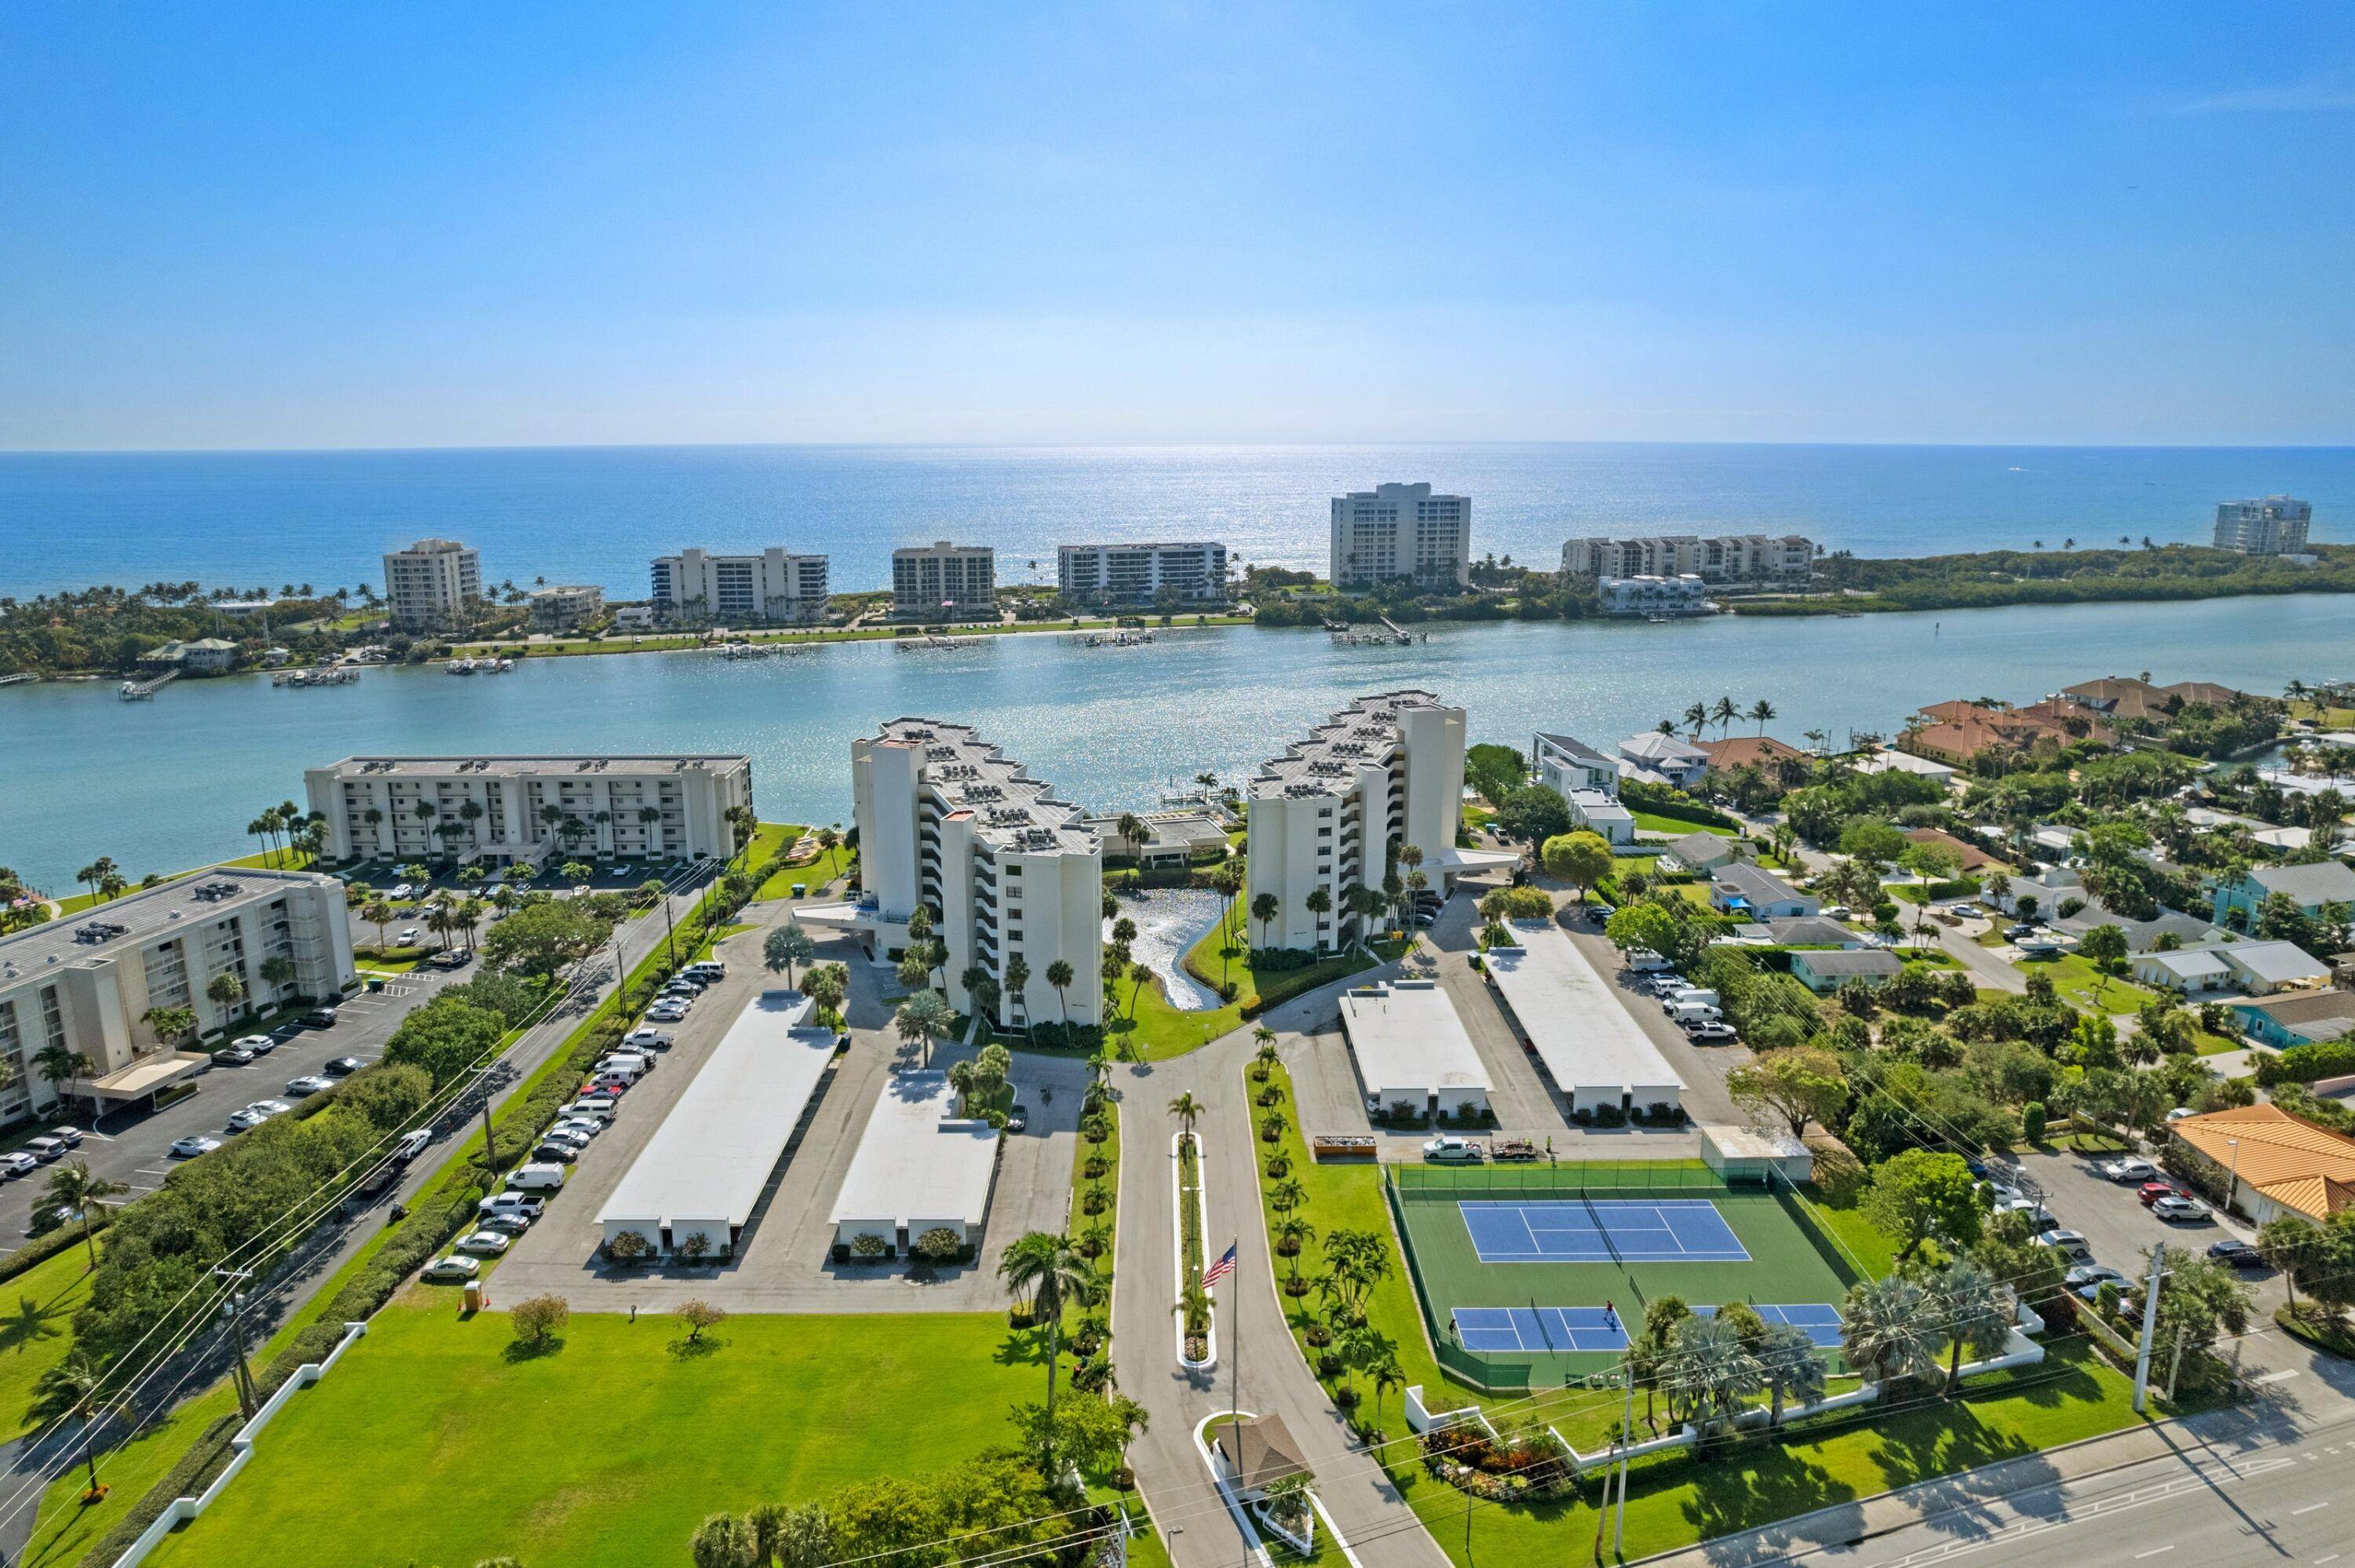 2024 FULL RENOVATION ! ! Welcome to Unit 202 at Sandpointe Bay Condominium, directly across from the prestigious Jupiter Island.